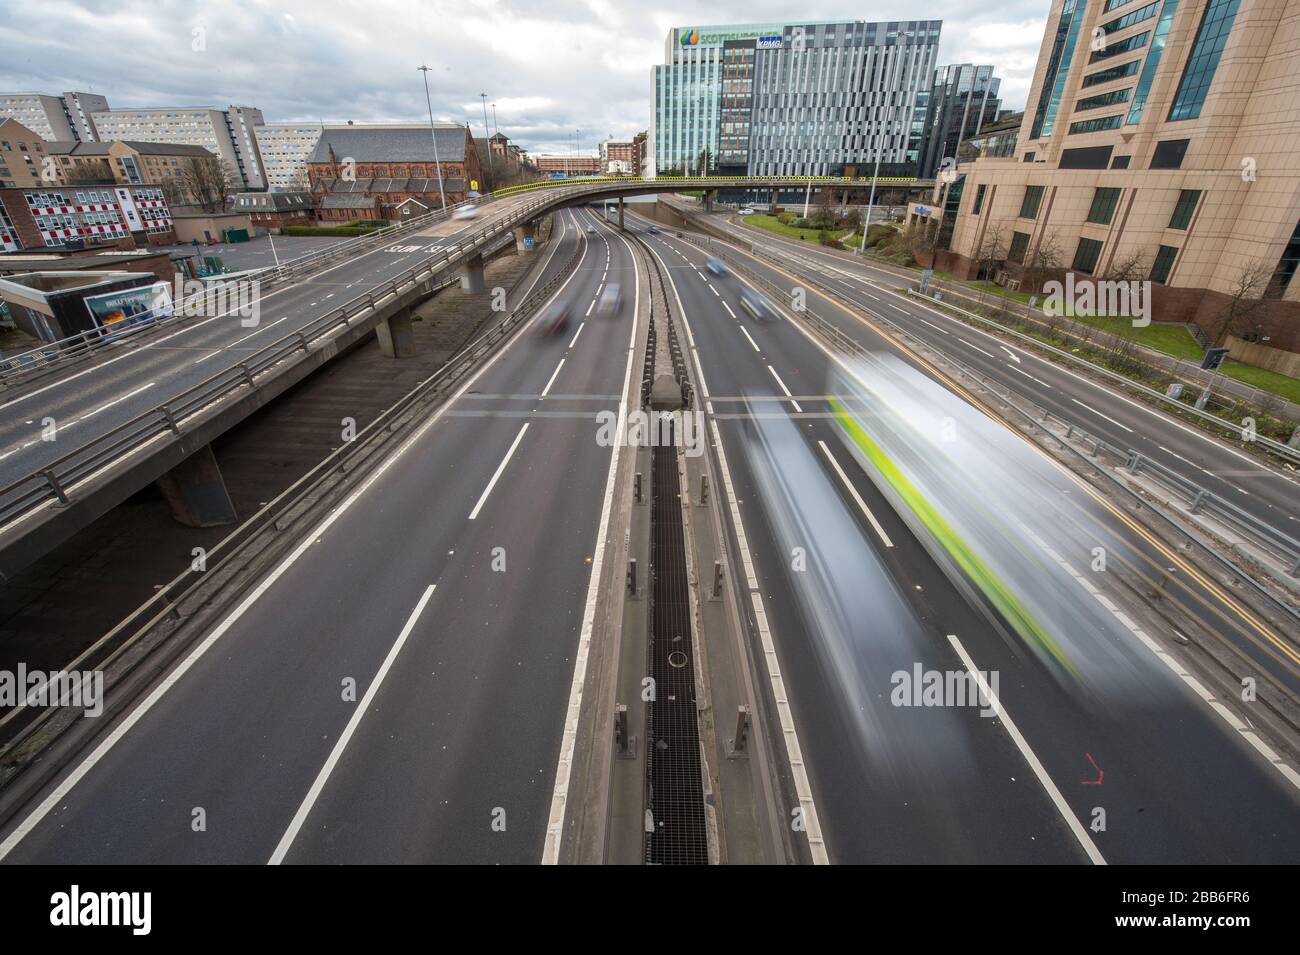 Glasgow, UK. 30th Mar, 2020. Pictured: The M8 Motorway which passes over the Kingston Bridge, Scotland's business bridge, is seen with free light and free flowing traffic which would normally otherwise be gridlocked in a traffic jam. The Kingston Bridge normally handles 150,000 vehicles per day under normal operations, however due to the lockdown imposted by the UK government, the number of vehicles has dwindled considerably. Credit: Colin Fisher/Alamy Live News Stock Photo